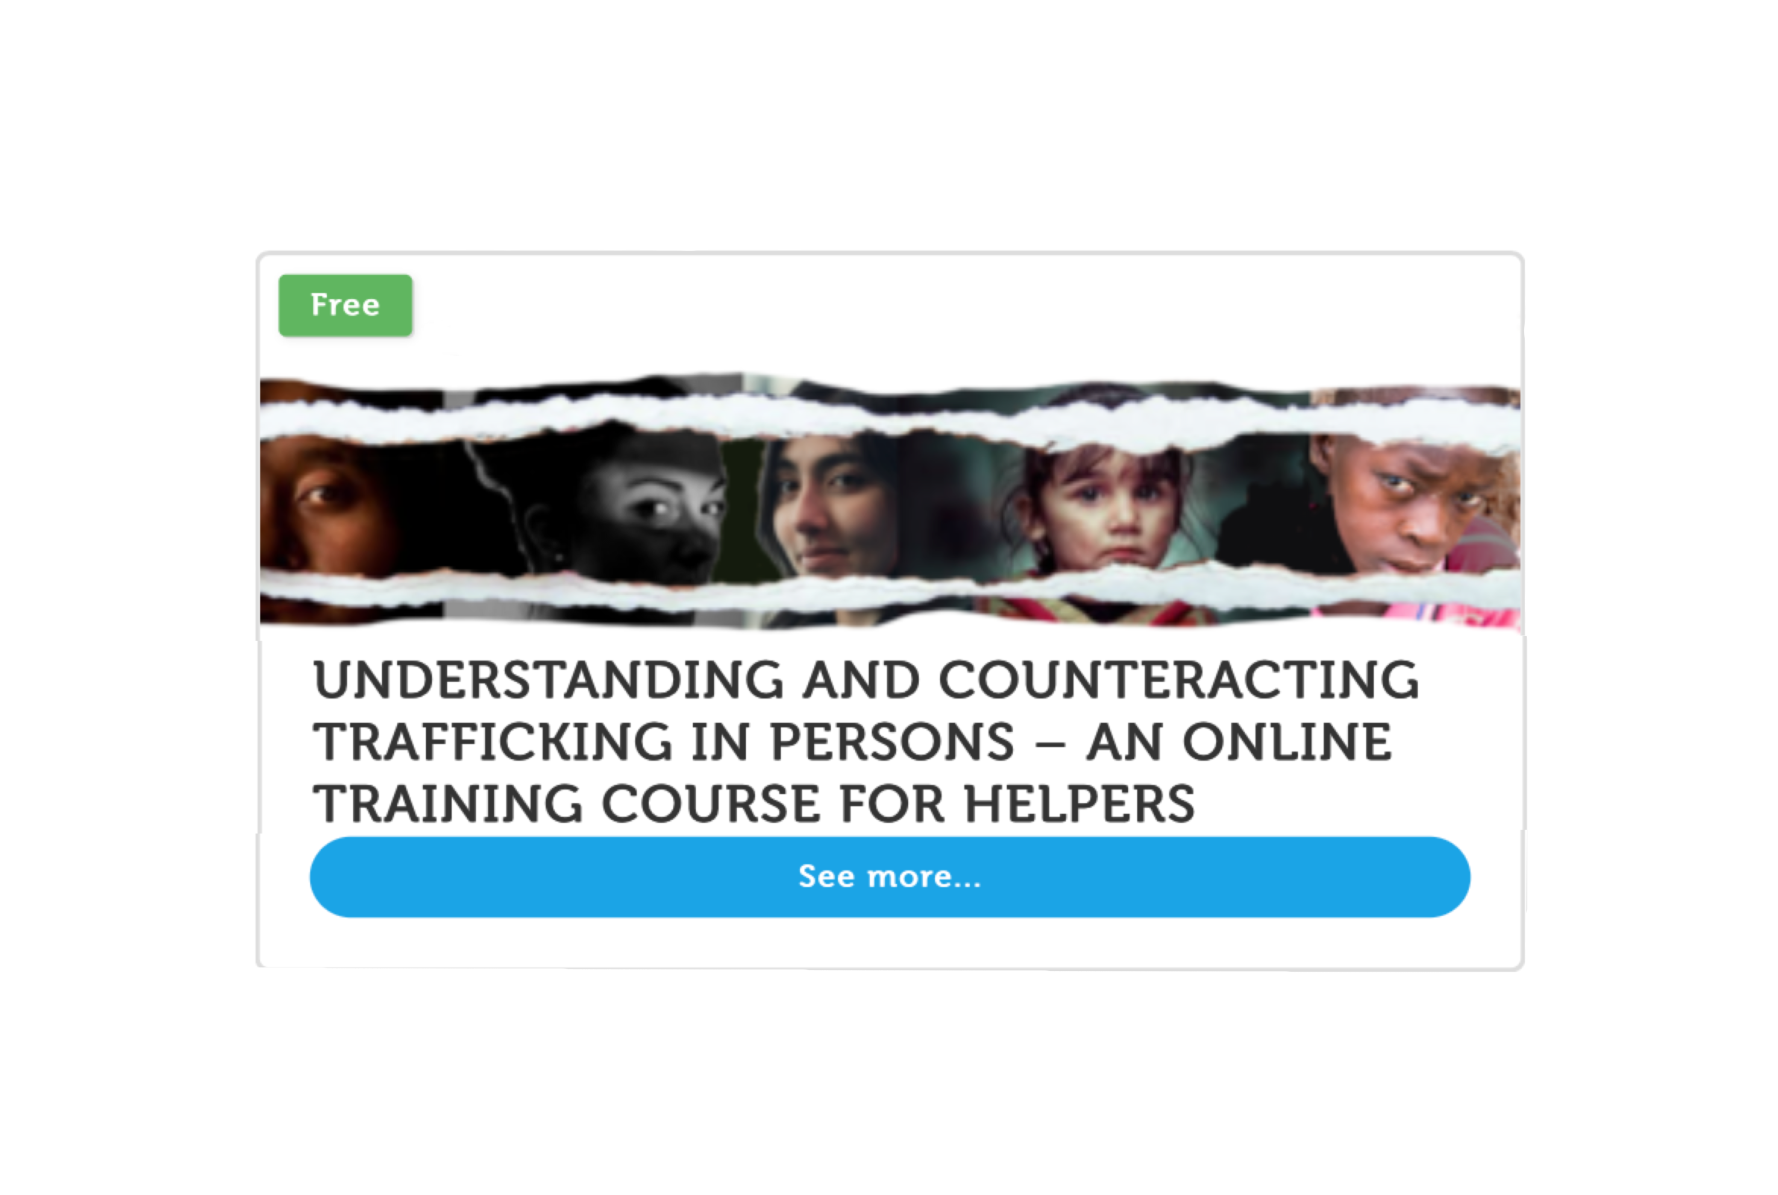 Our course on human trafficking in English, French, Spanish, German, and Italian